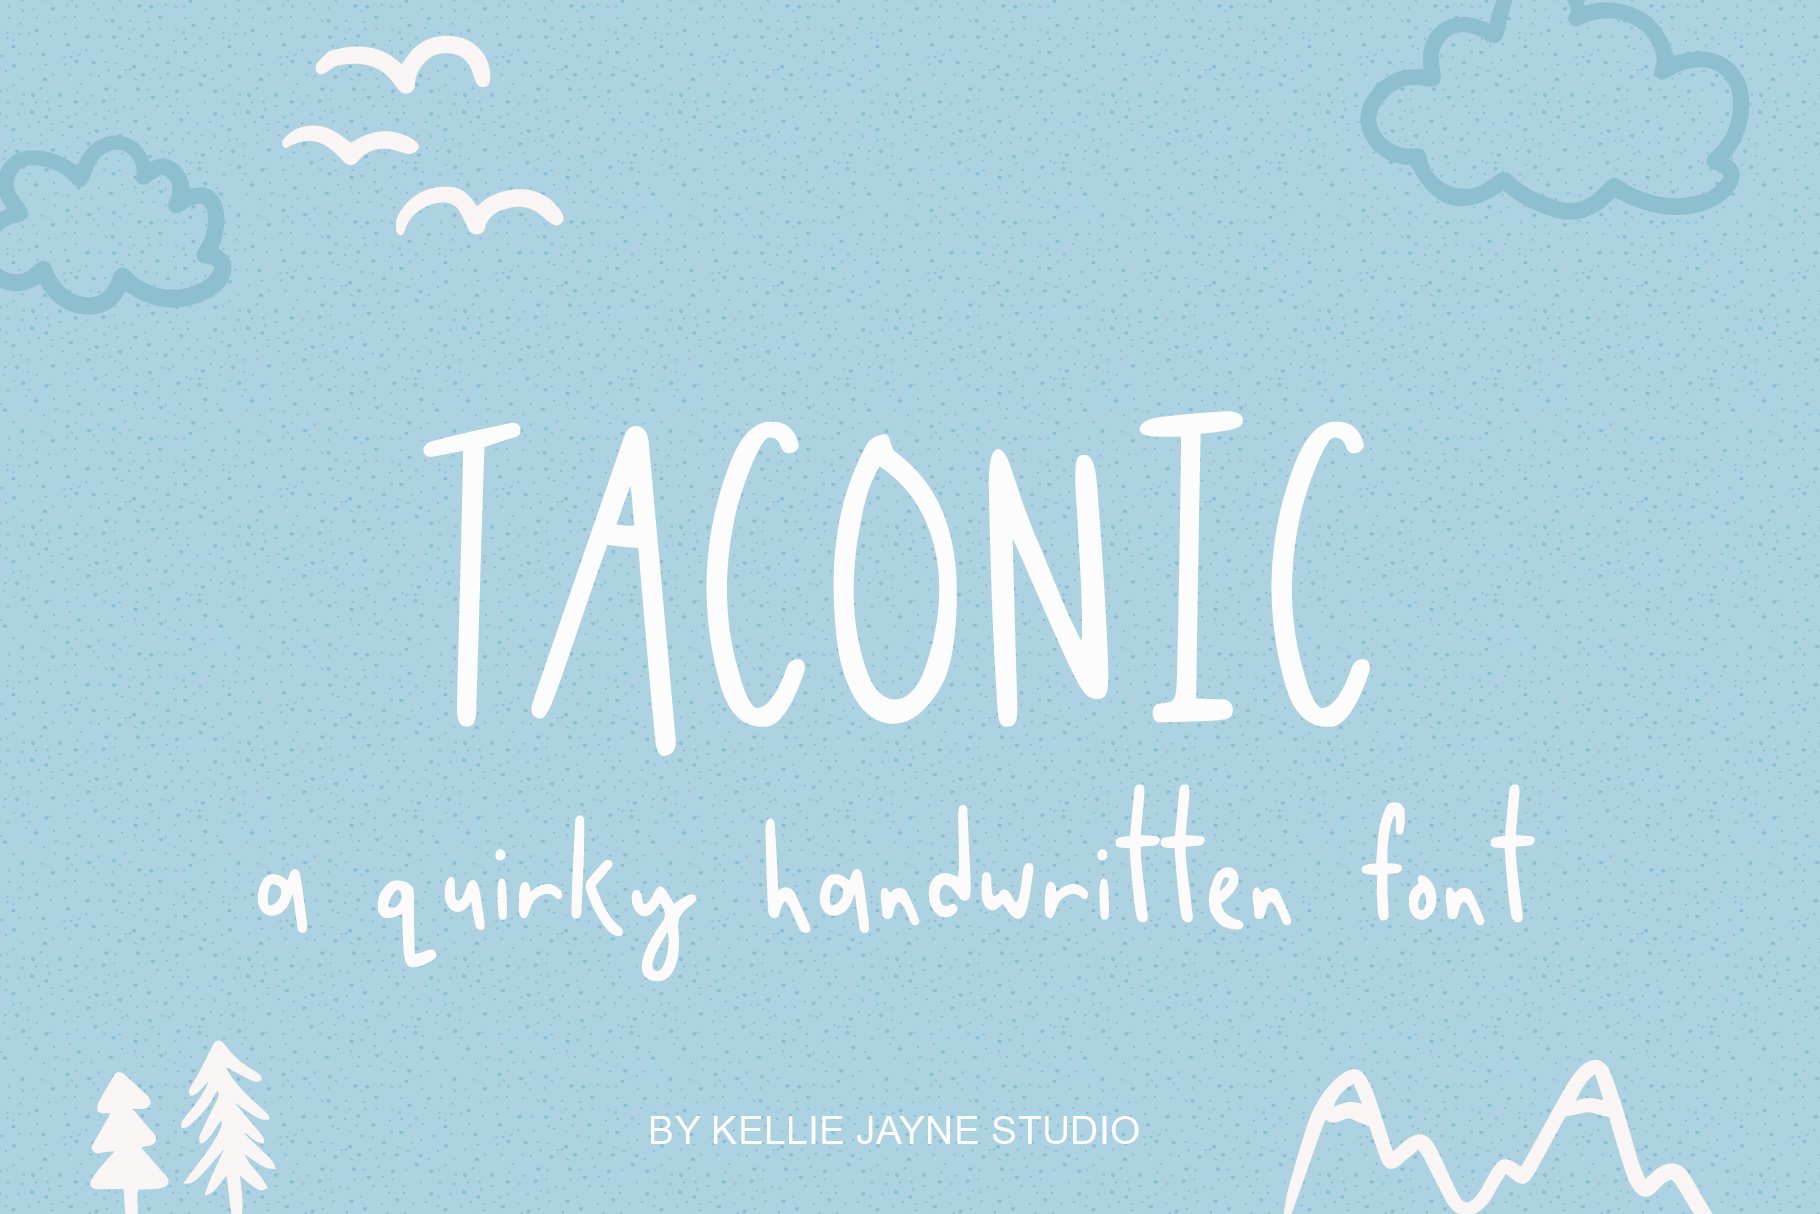 Taconic Handwritten Font cover image.